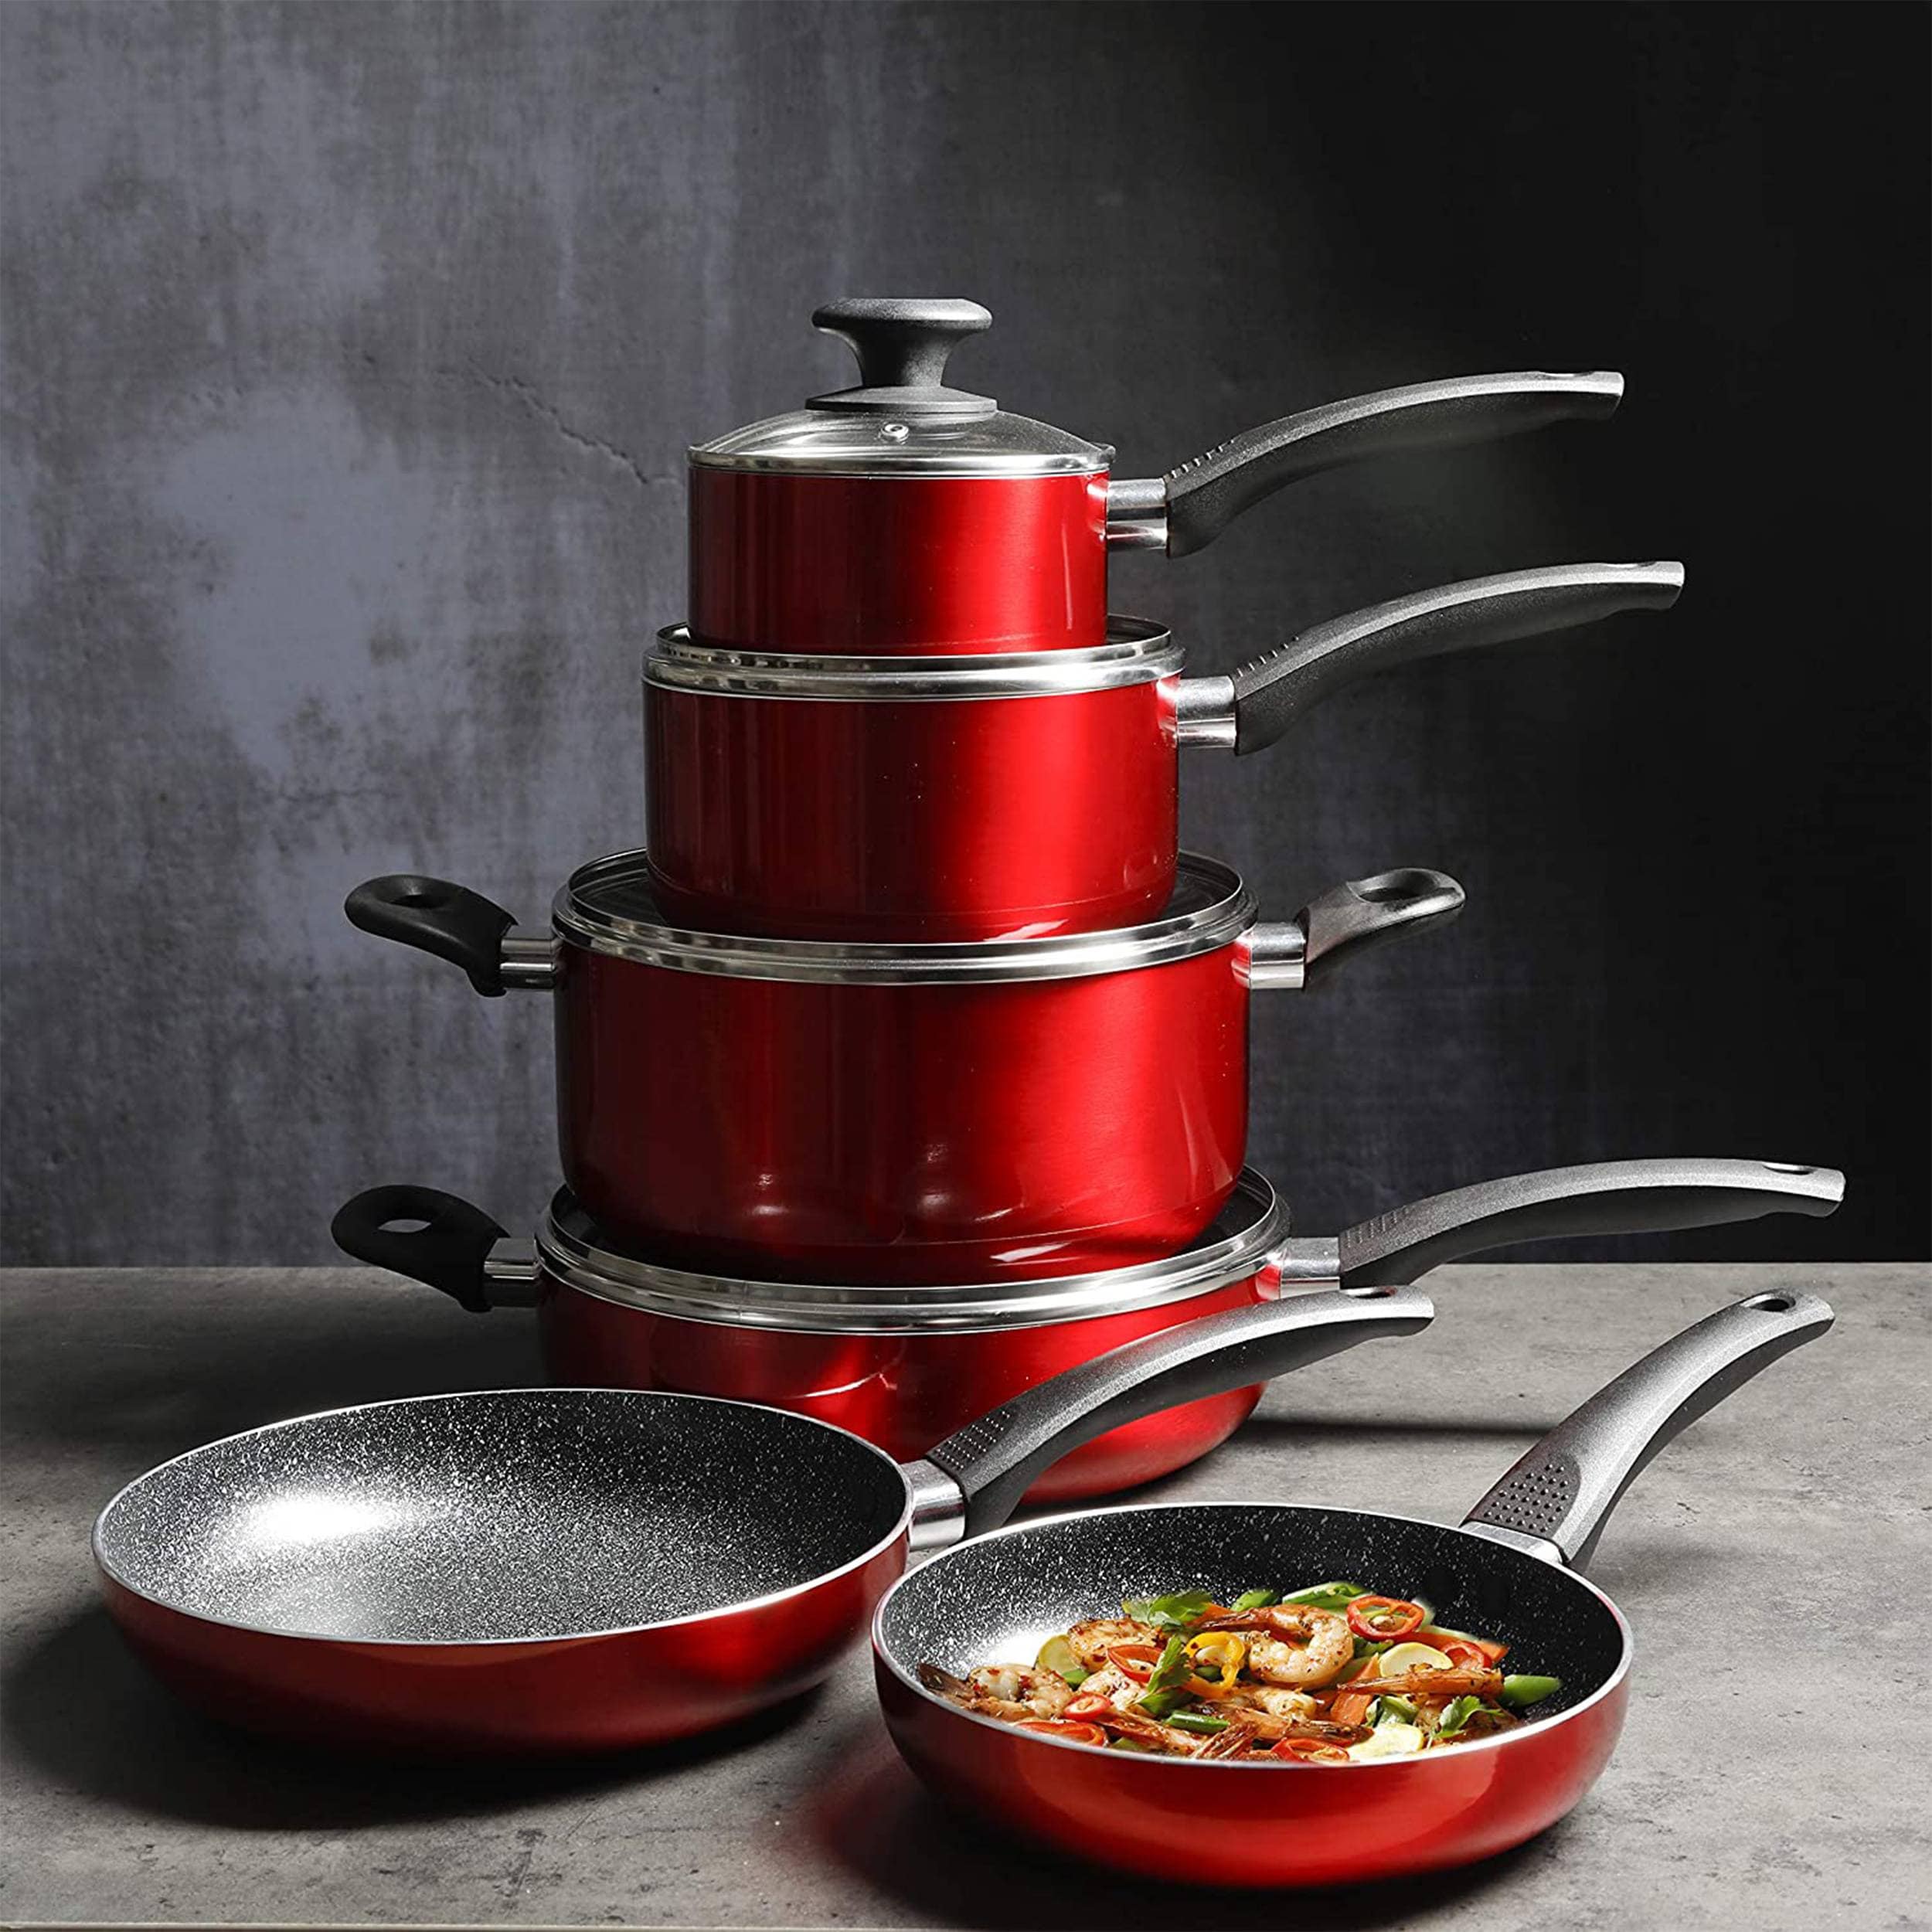 Oster 8 inch and 10 inch Nonstick Frying Pan Set in Speckled Red